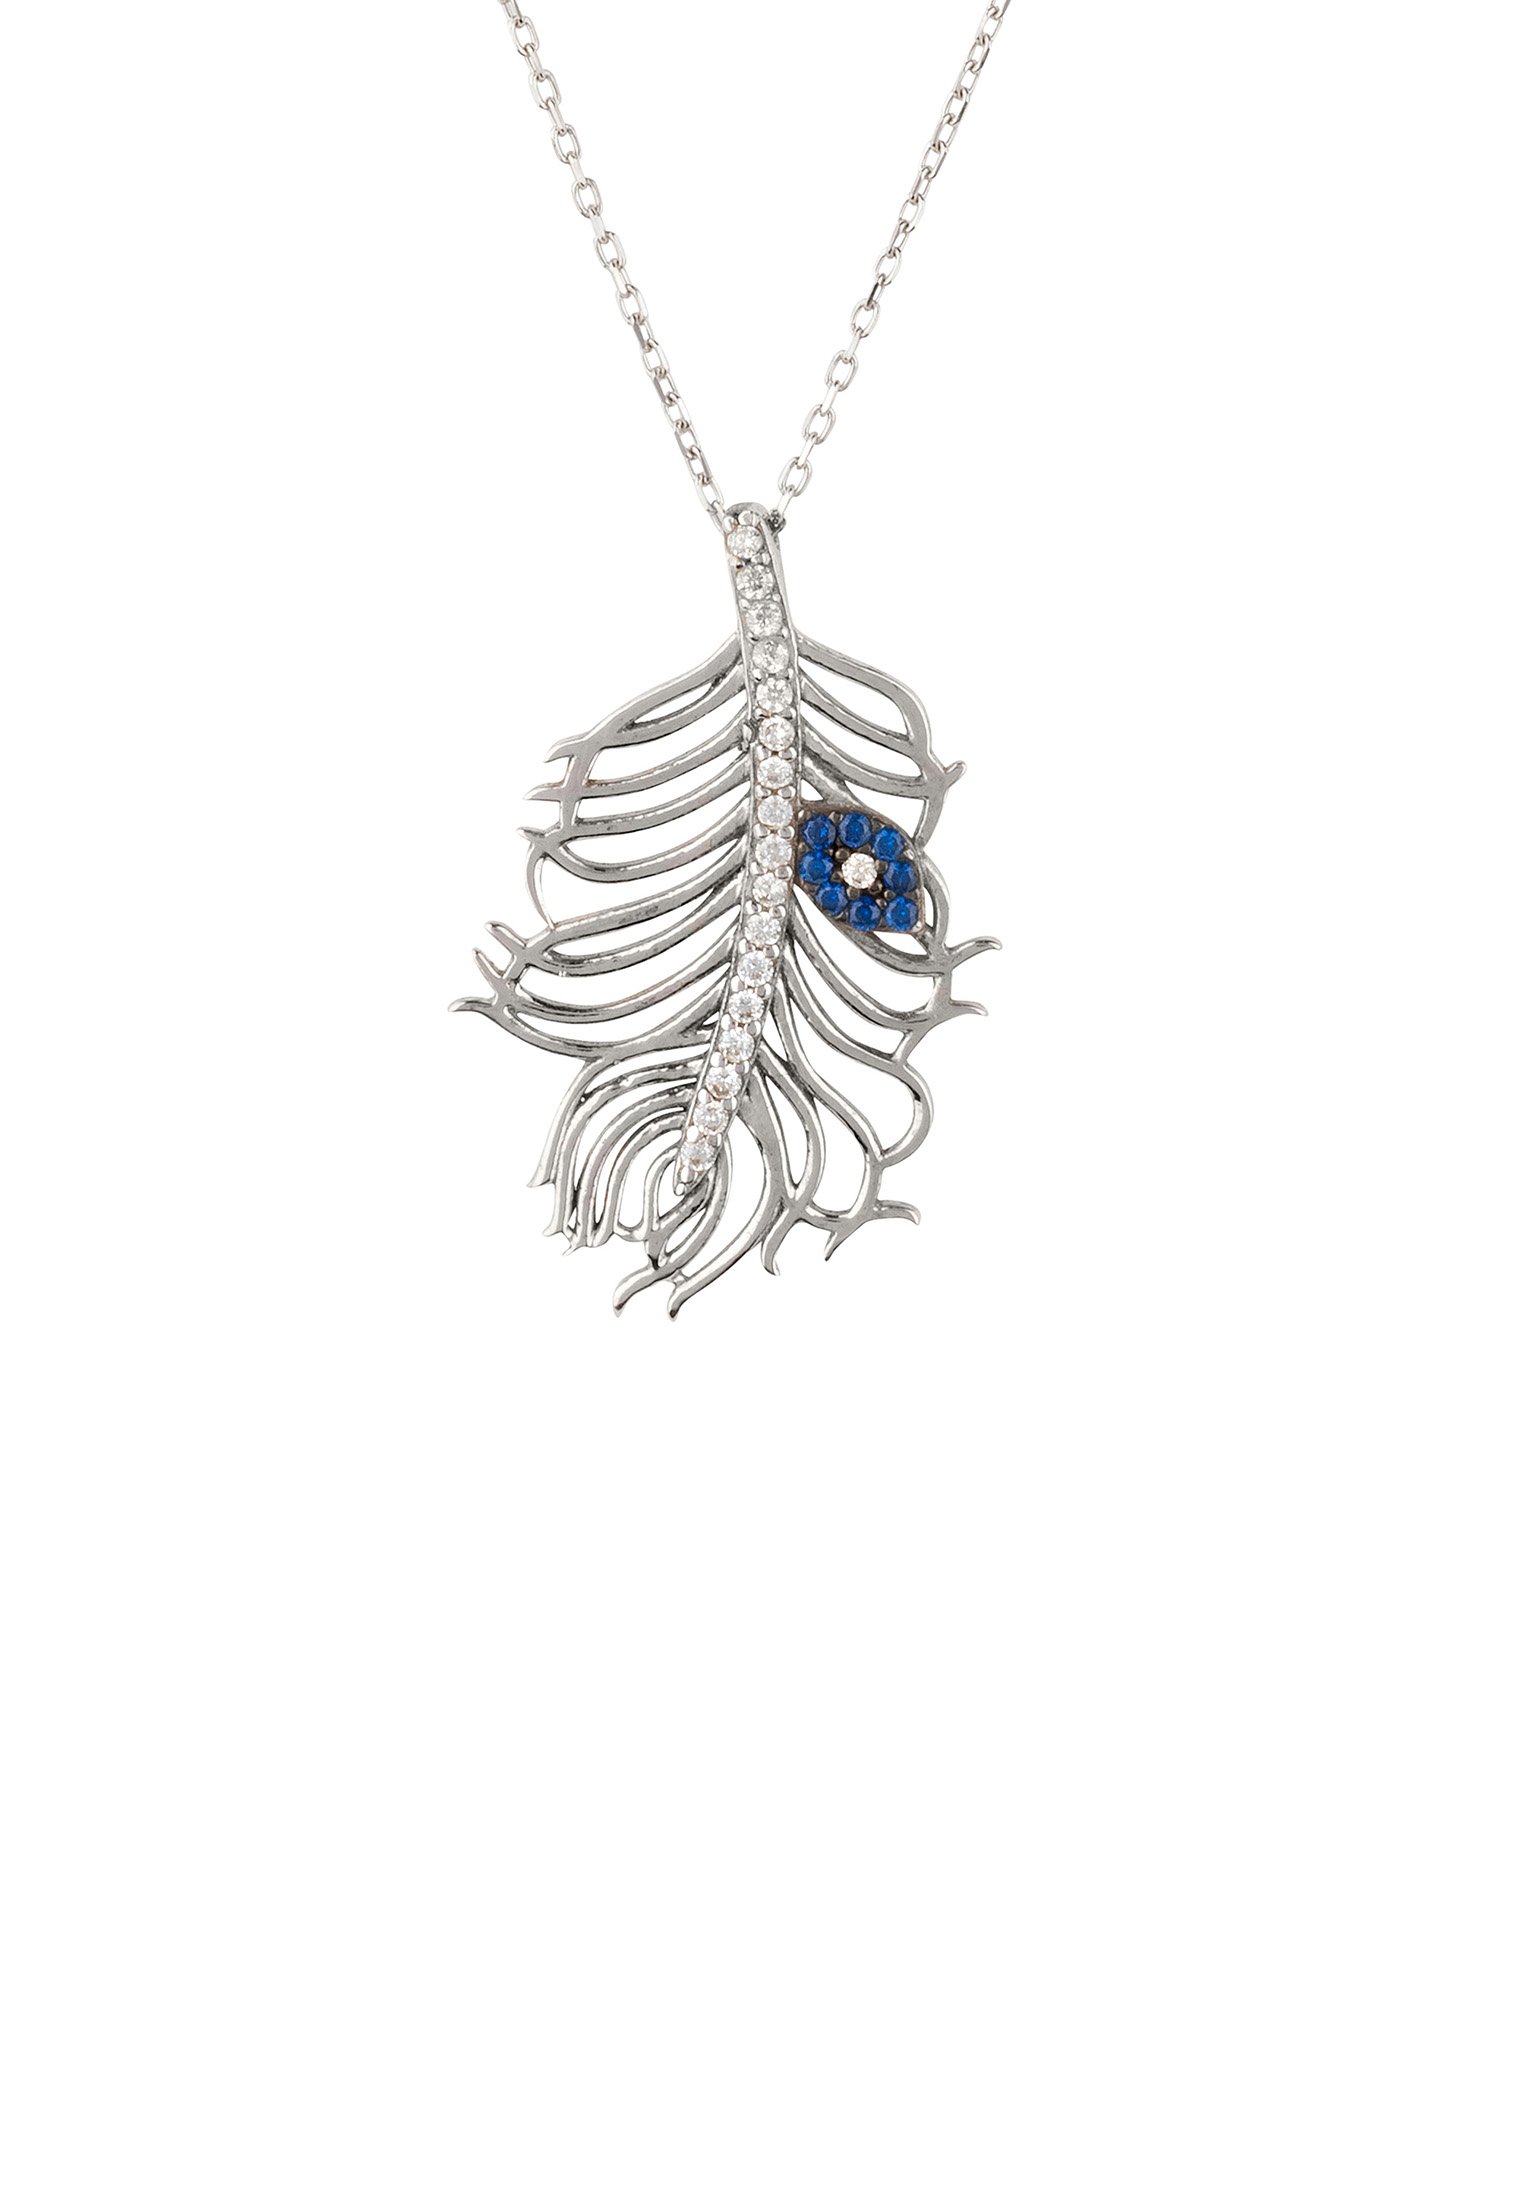 Peacock Feather Evil Eye Necklace Silver